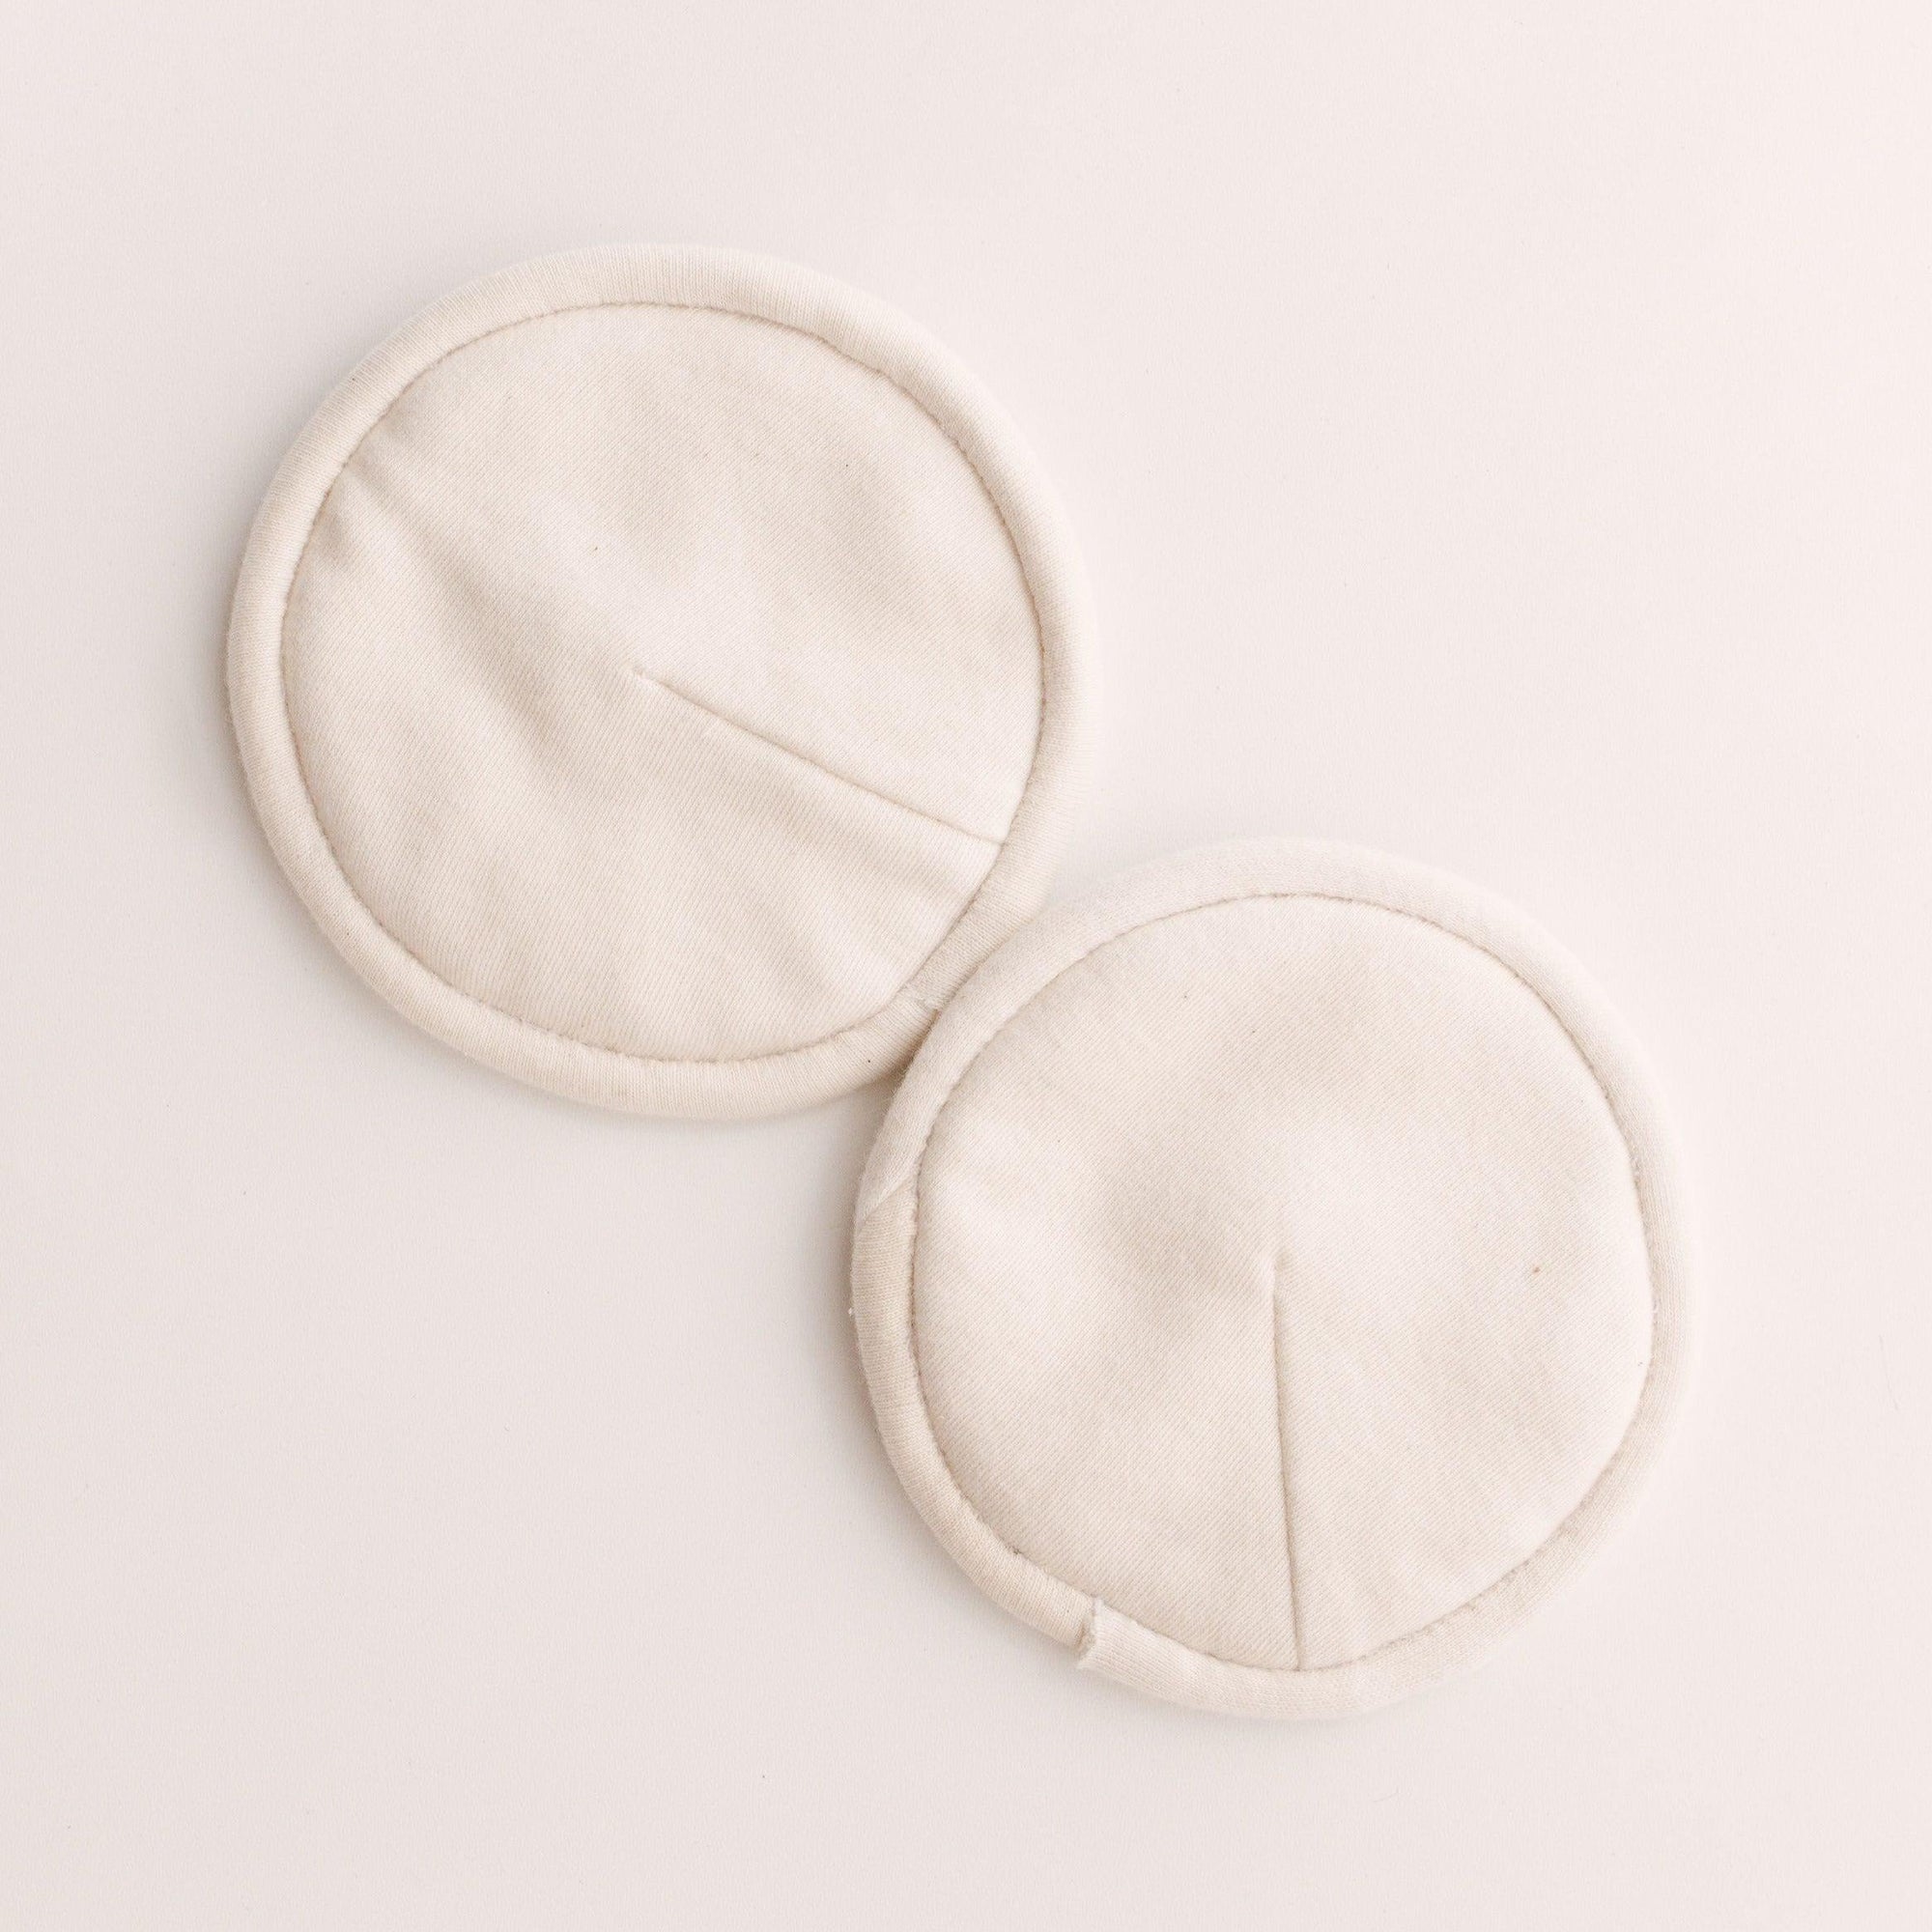 Bundl wool nursing pads have been designed especially for new mothers and aim to provide optimal conditions for successful, long-lasting breast-feeding. 